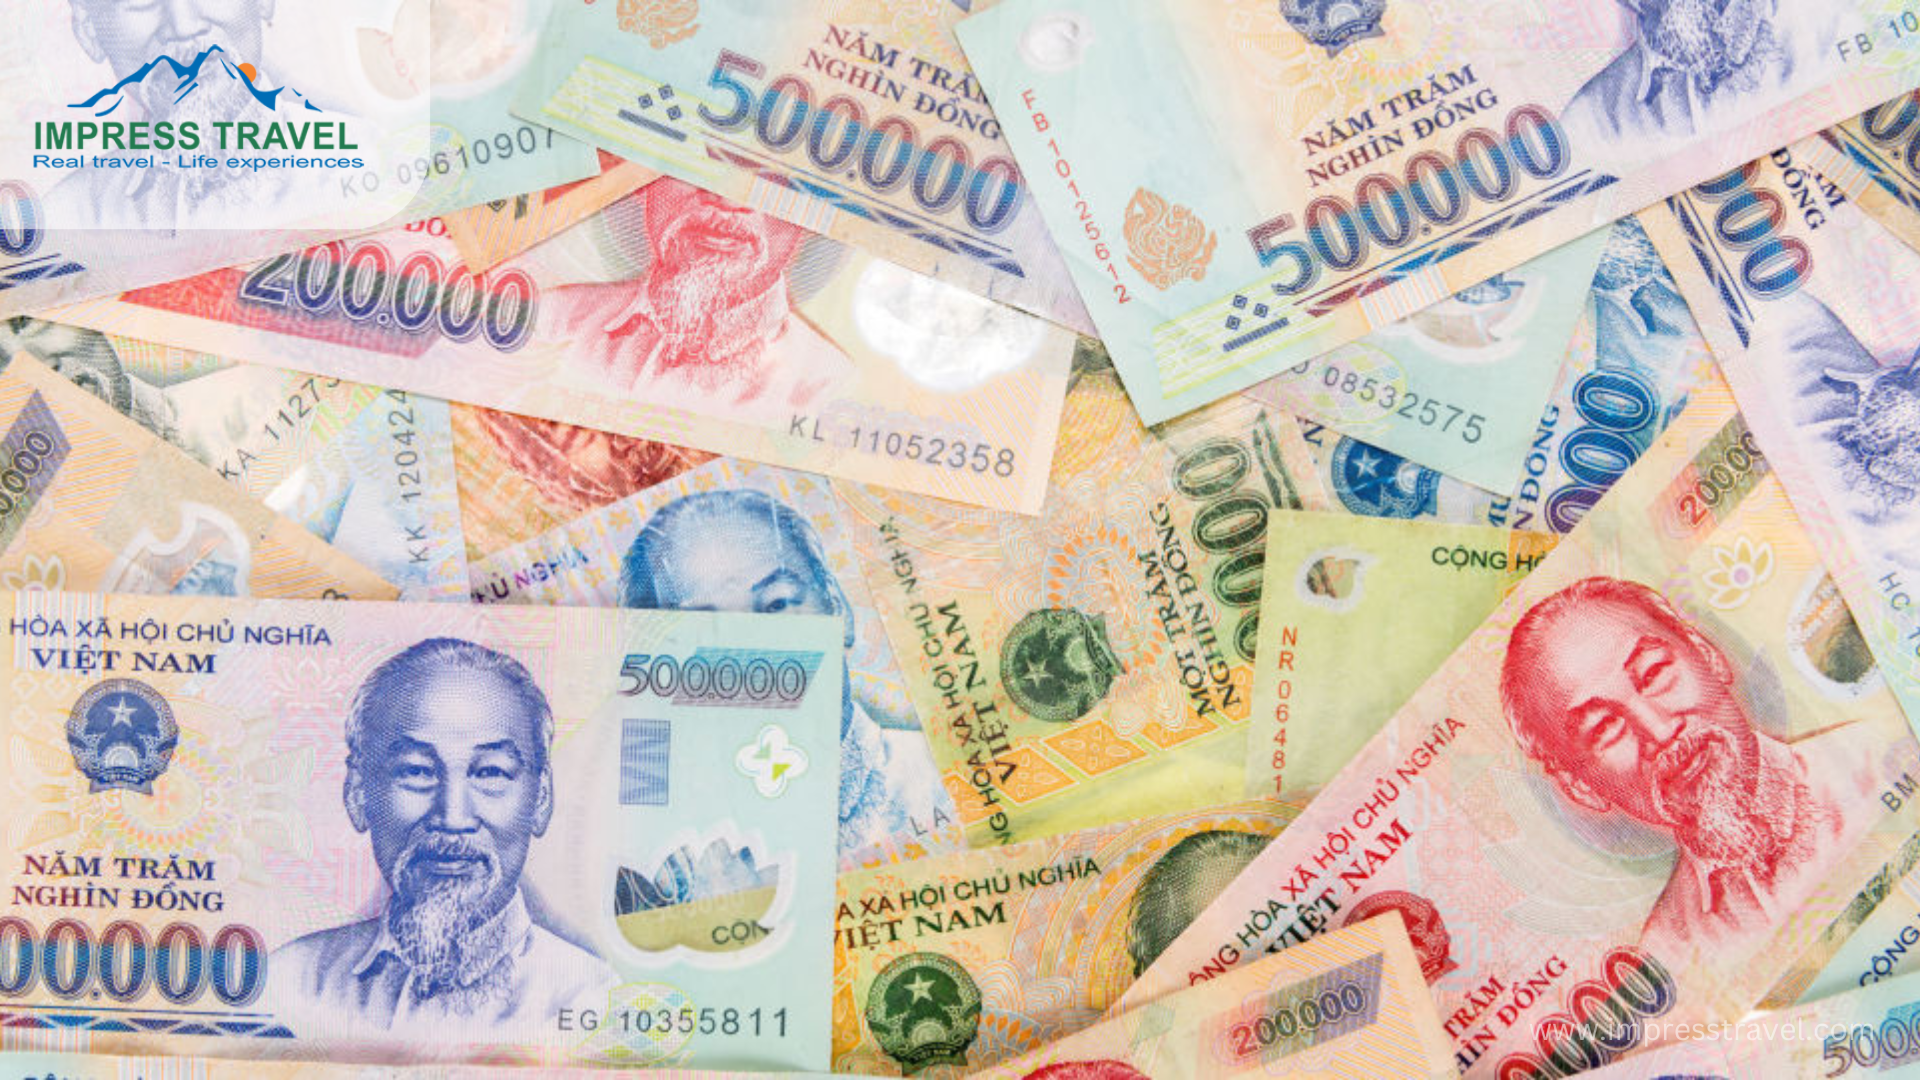 The currency in Vietnam